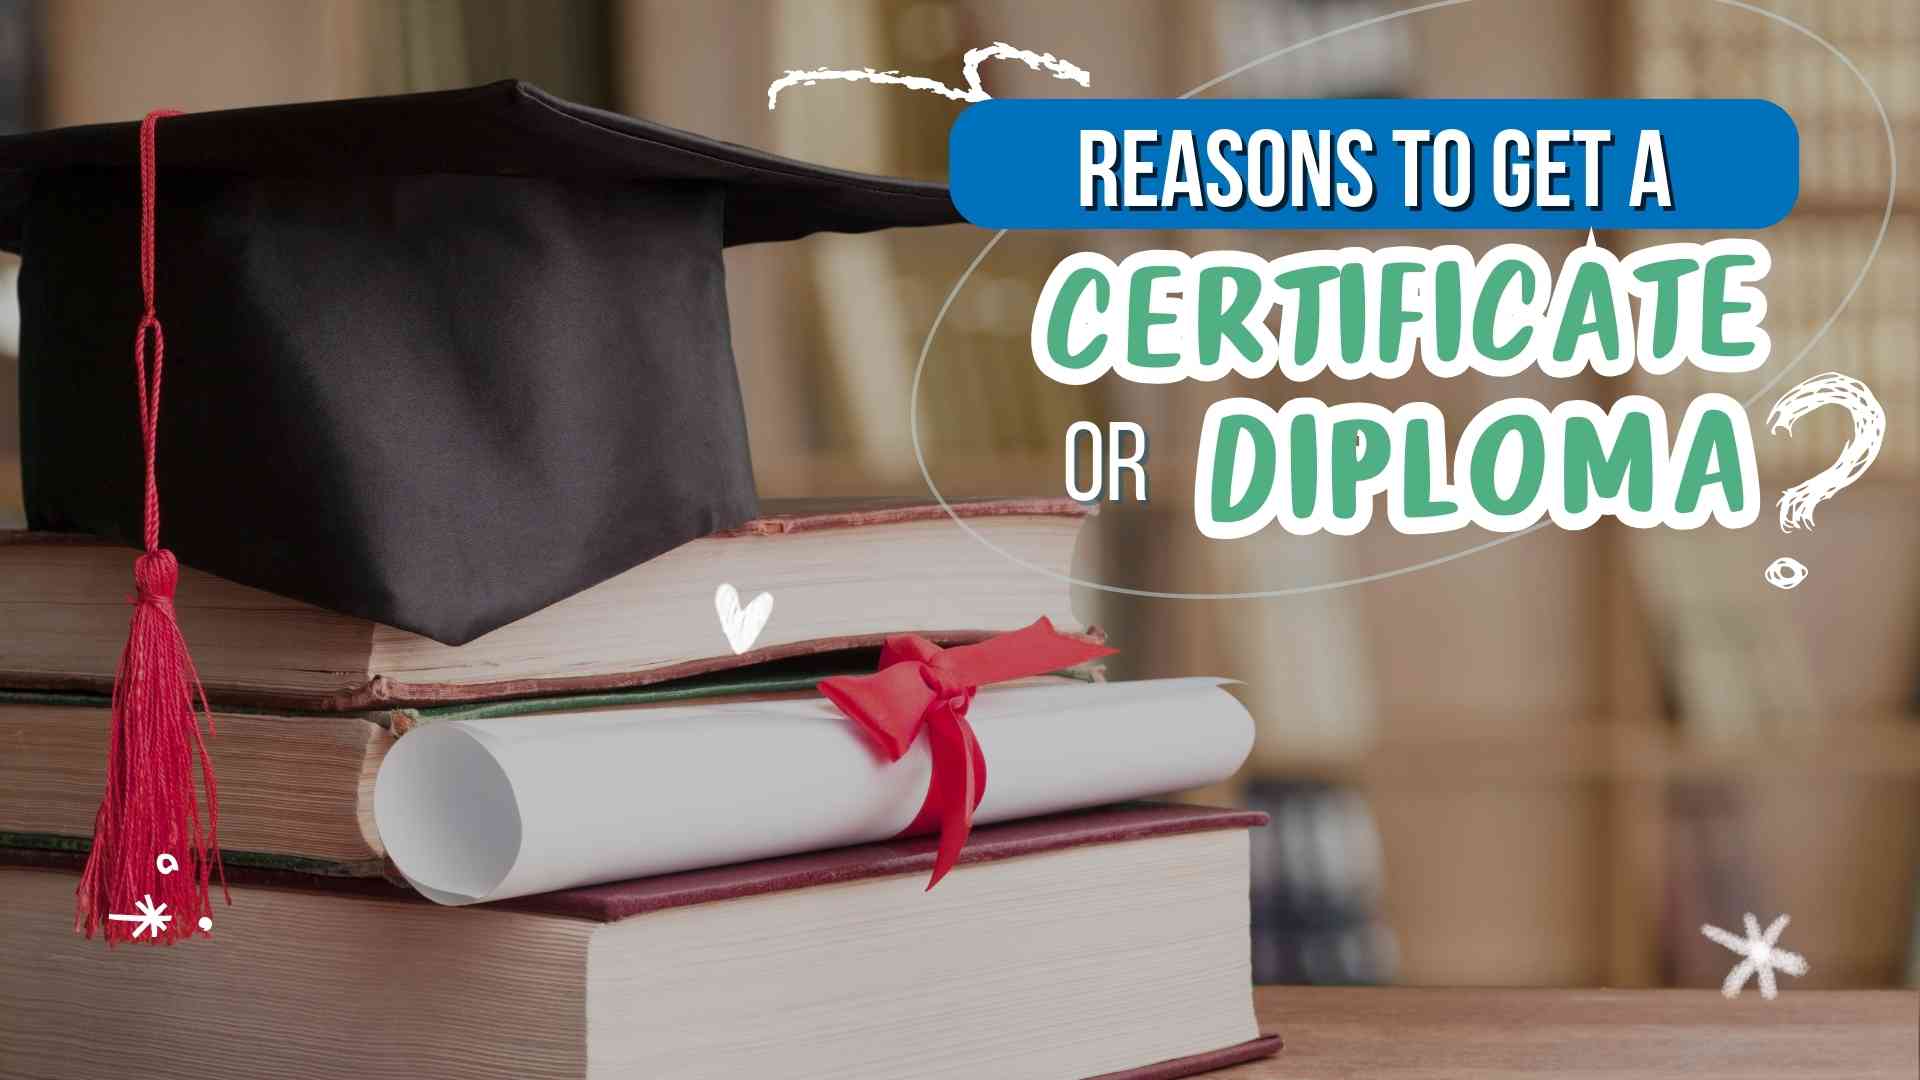 Reasons to get Certificate or Diploma